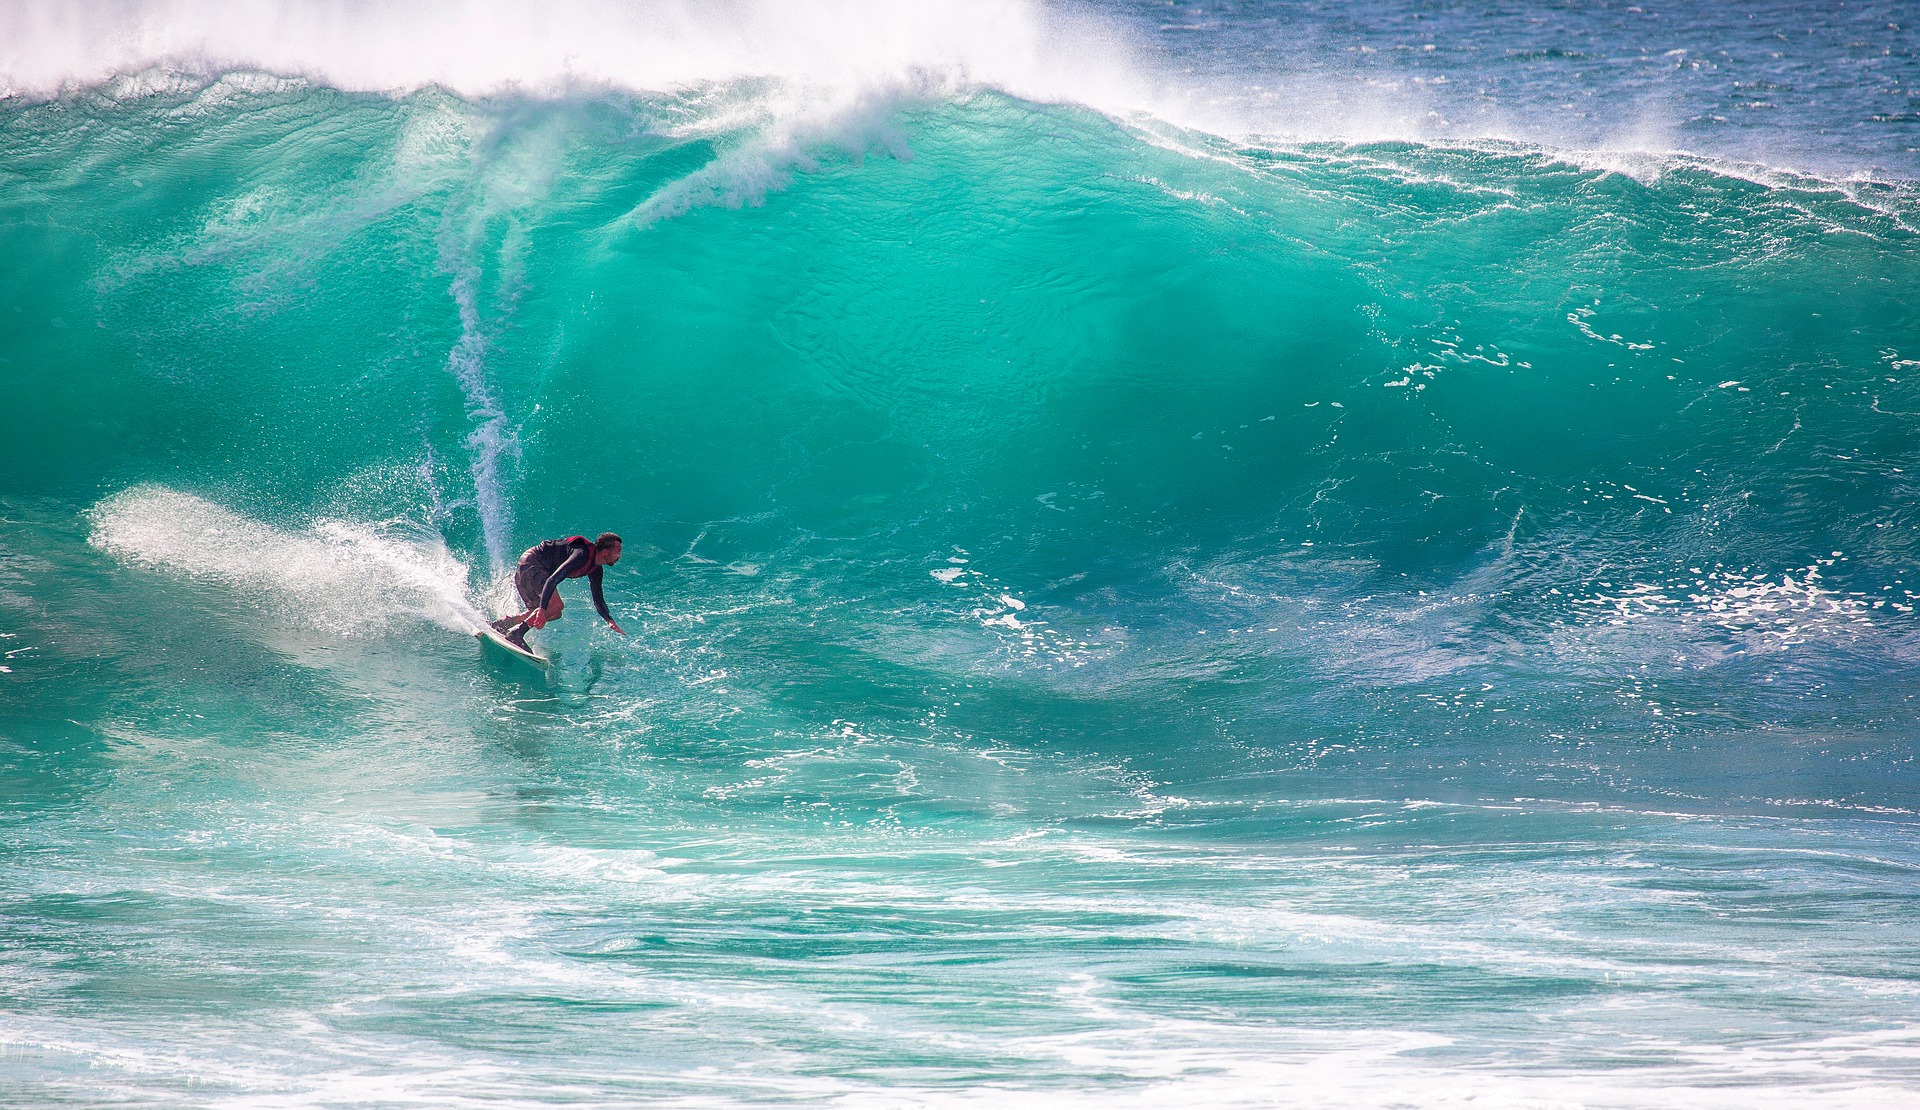 Big wave surfer in light-blue, turquoise water, ocean